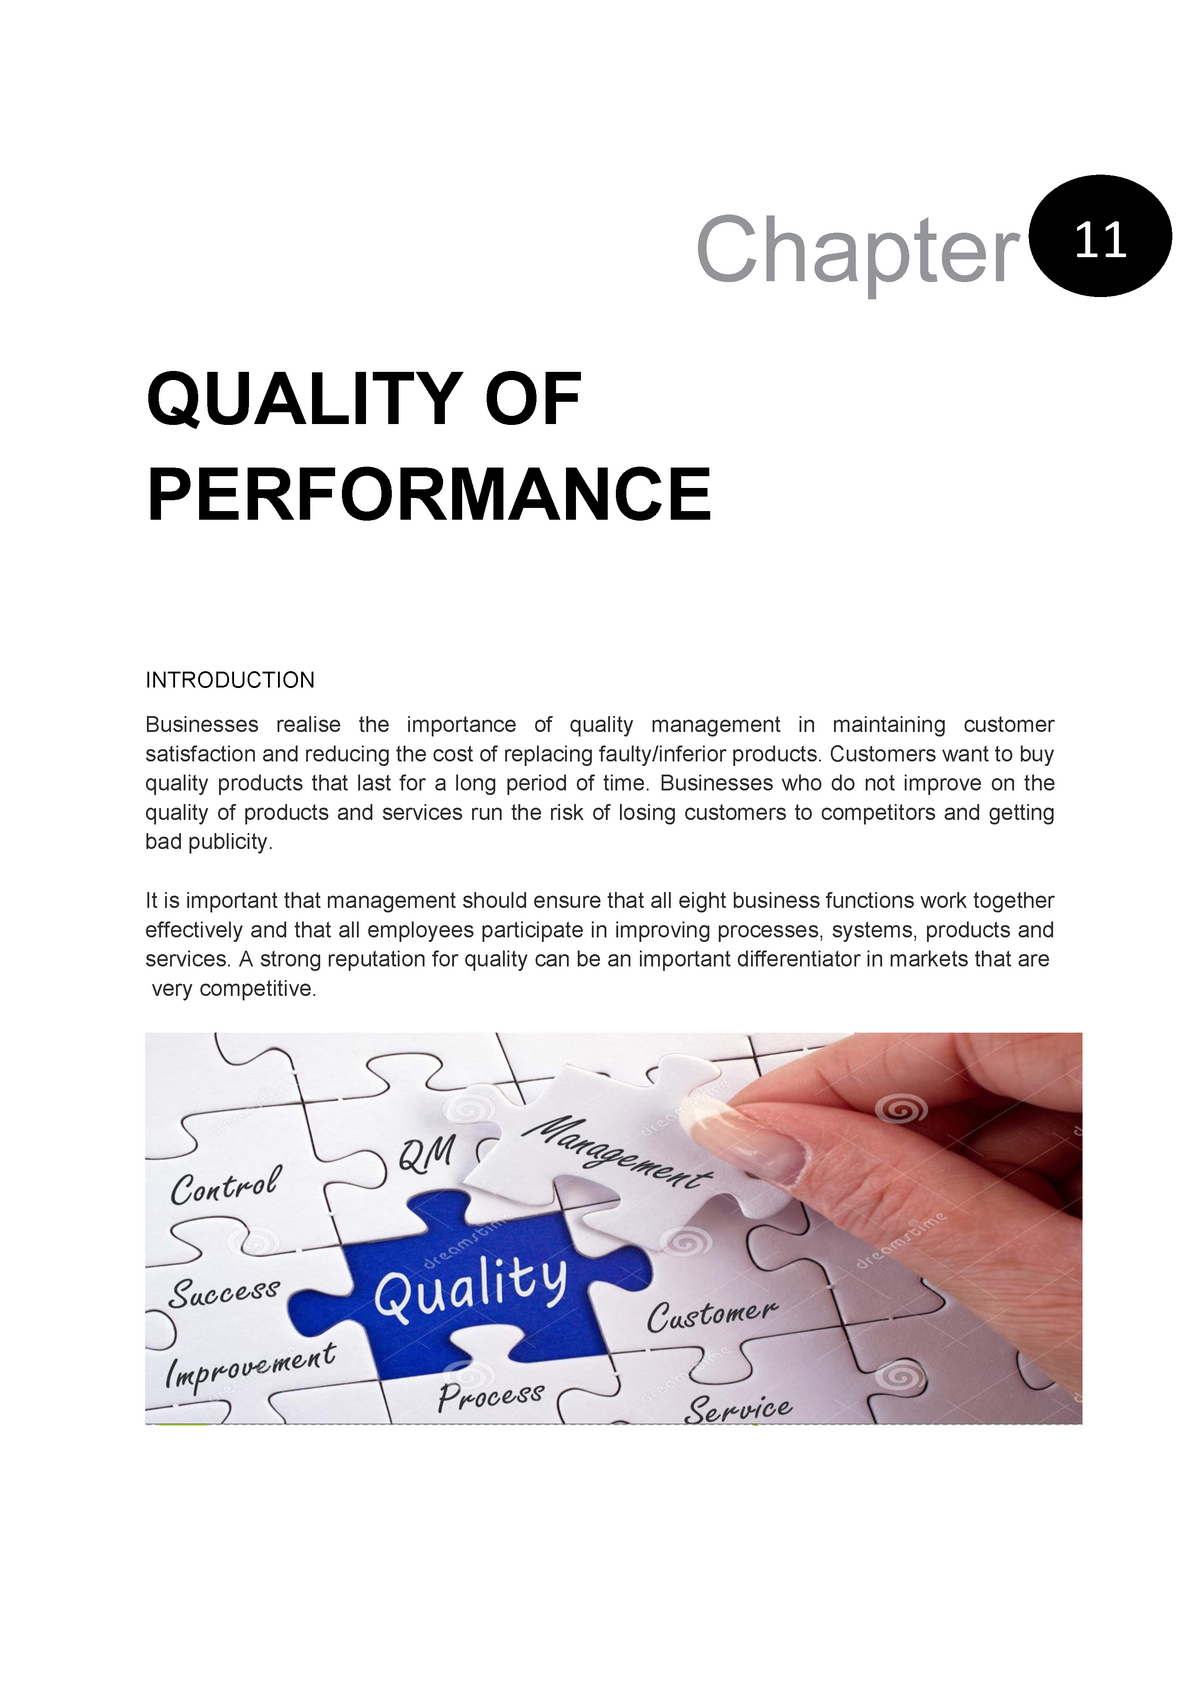 quality of performance business studies essay pdf download